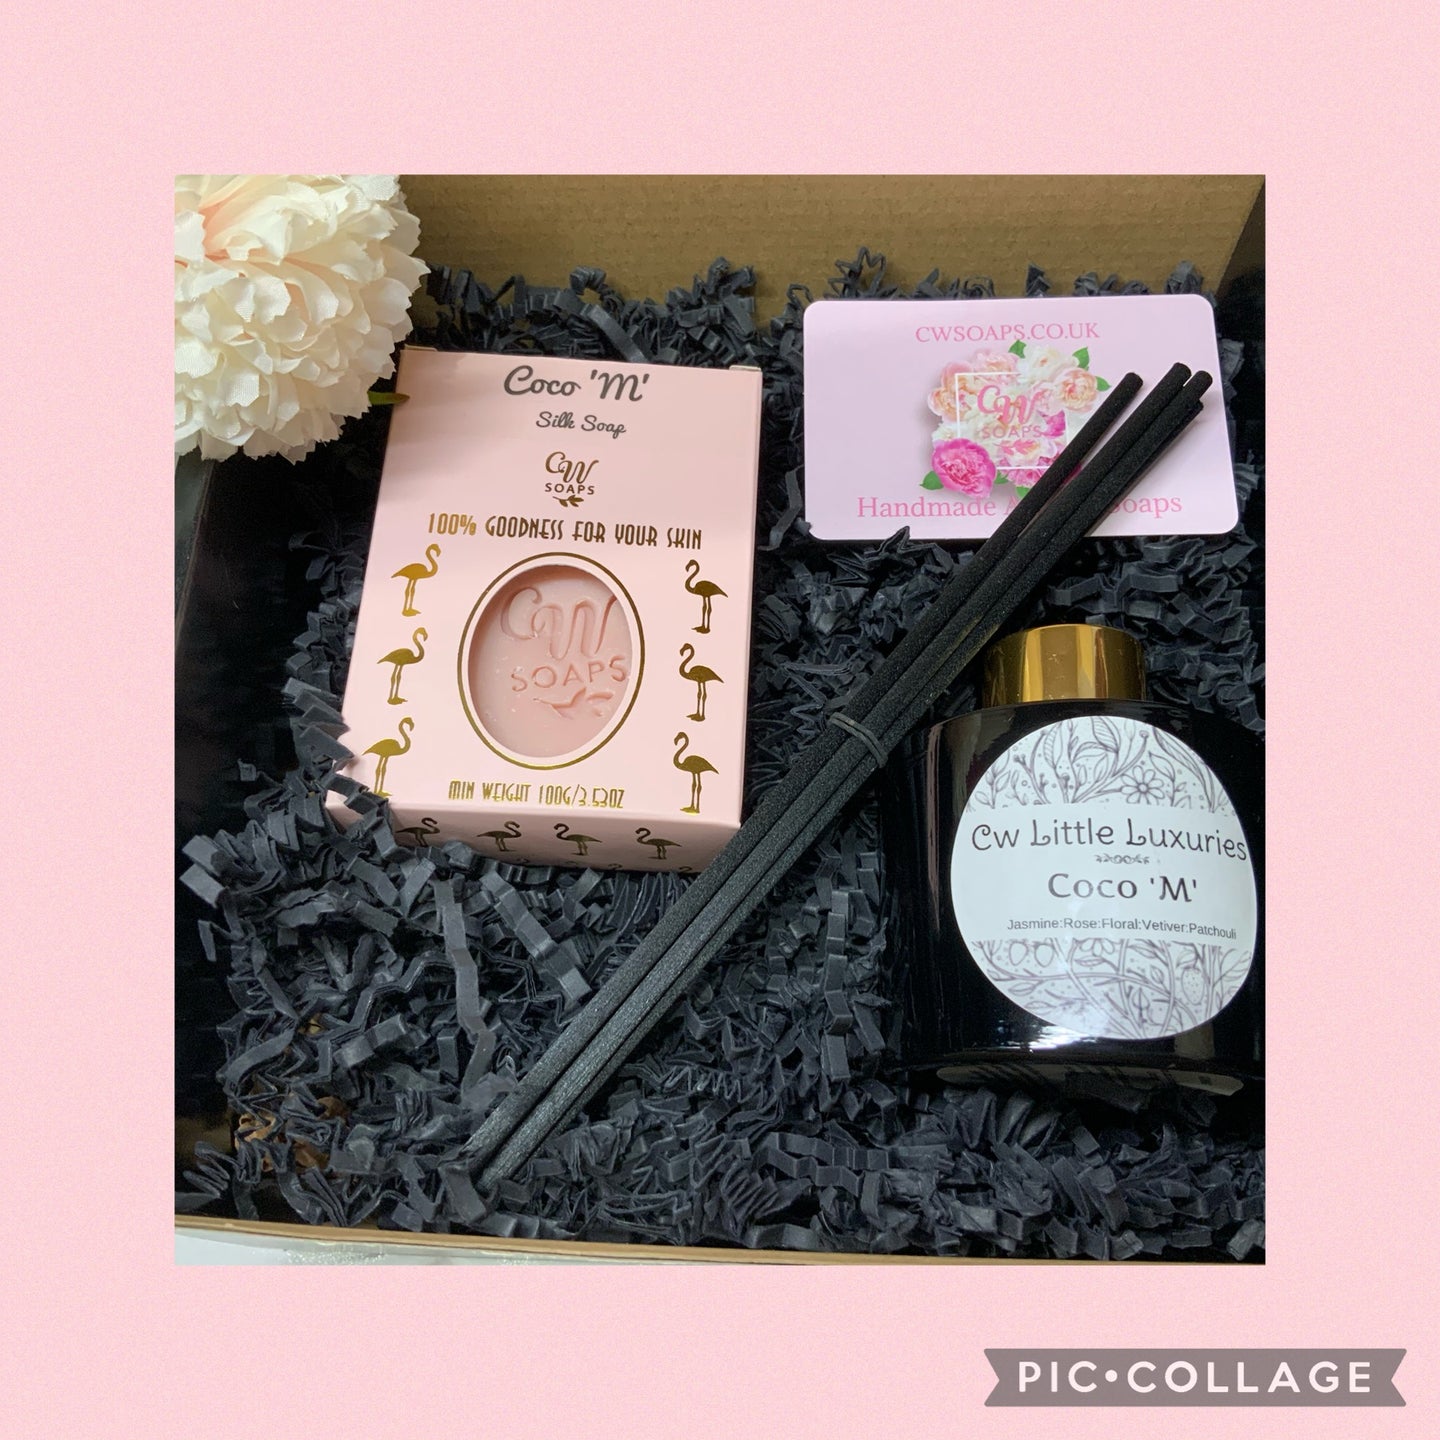 Coco-m Gift Sets